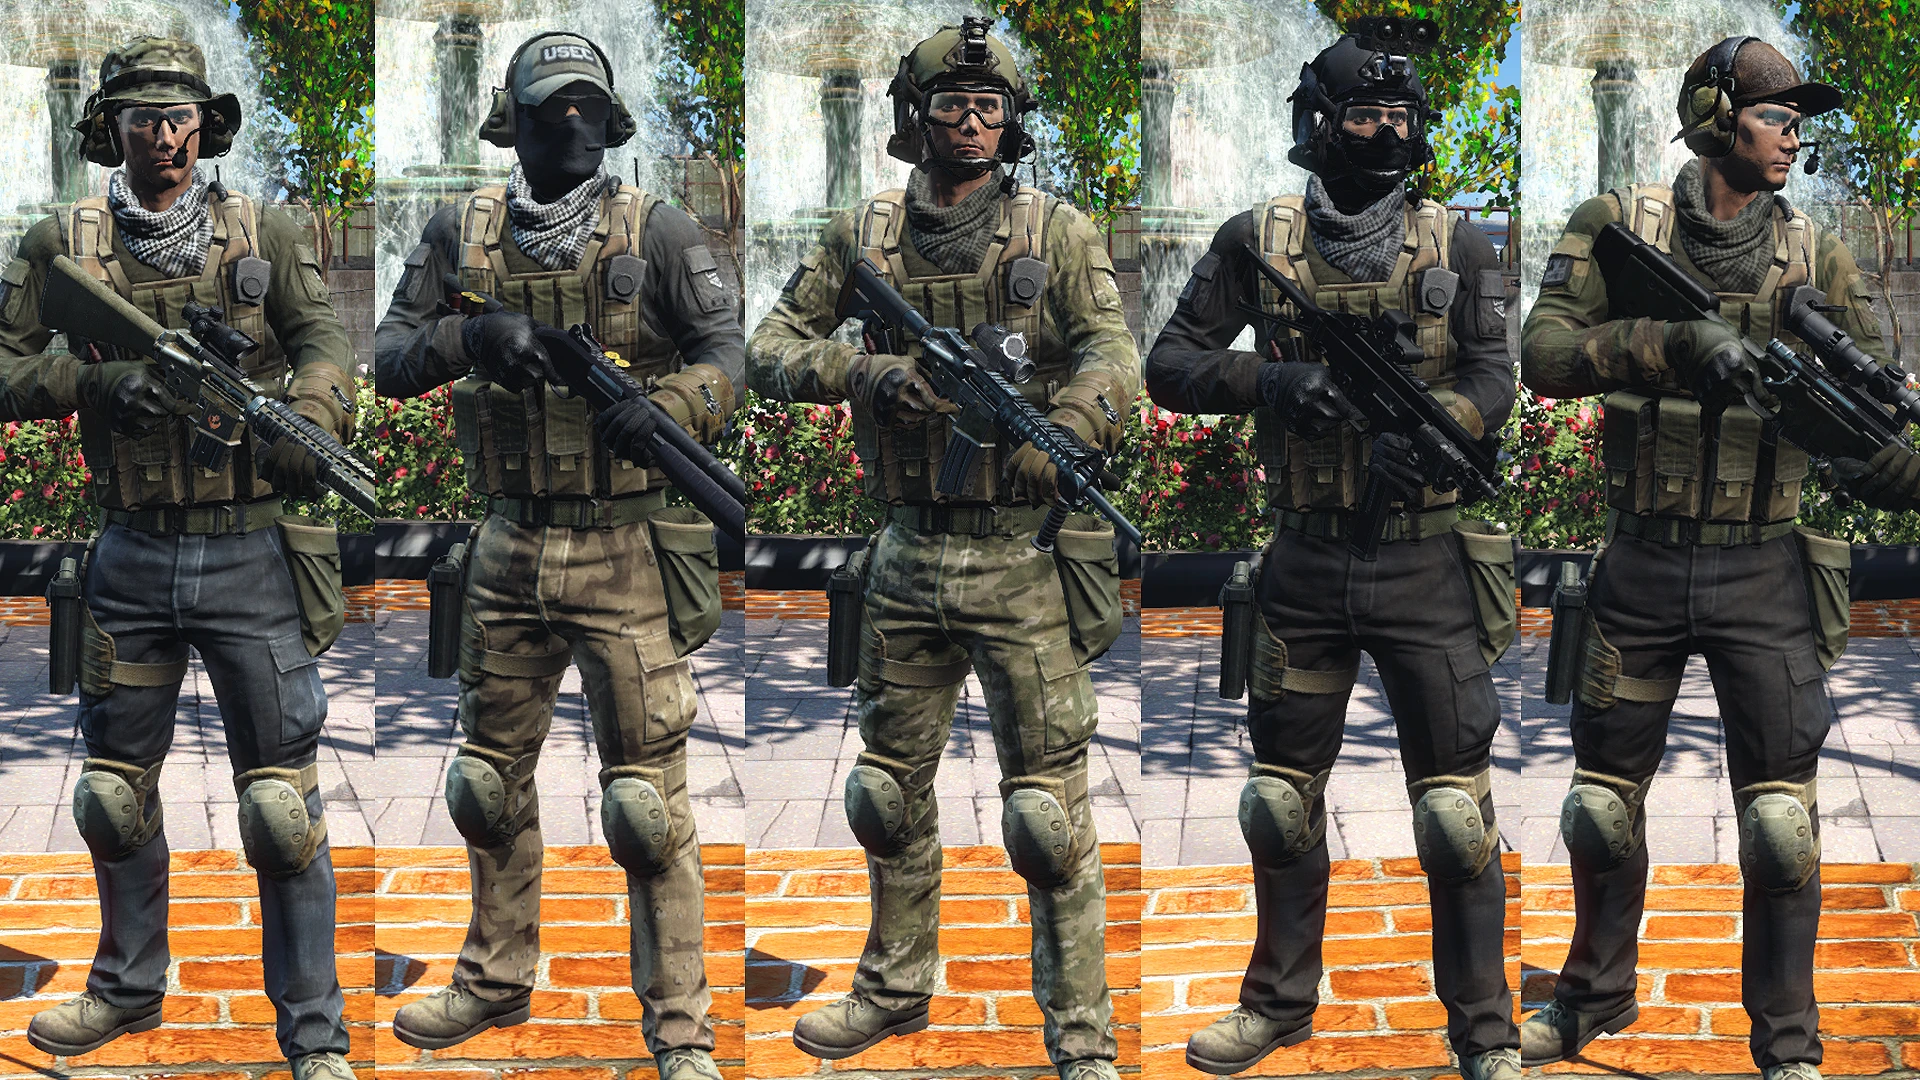 Https www fallout4 mods com. Fallout 4 Elite PMC Armor. Fallout 4 PMC Armor. Броня USEC Fallout 4. Броня USEC фоллаут 4.